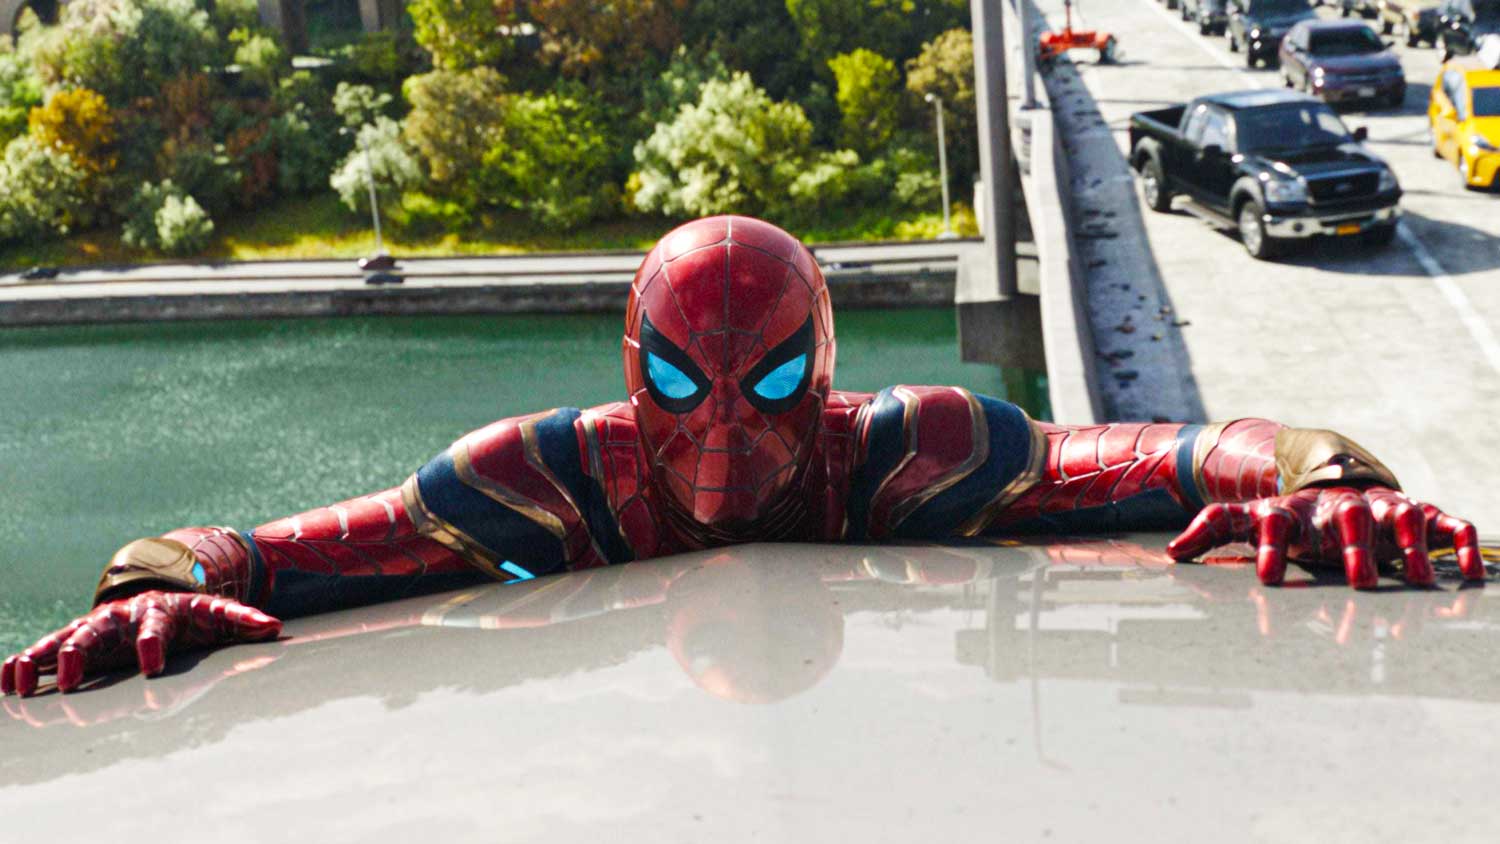 Spider-Man--No-Way-Home-Isn't-Eligible-For-BAFTA-Awards